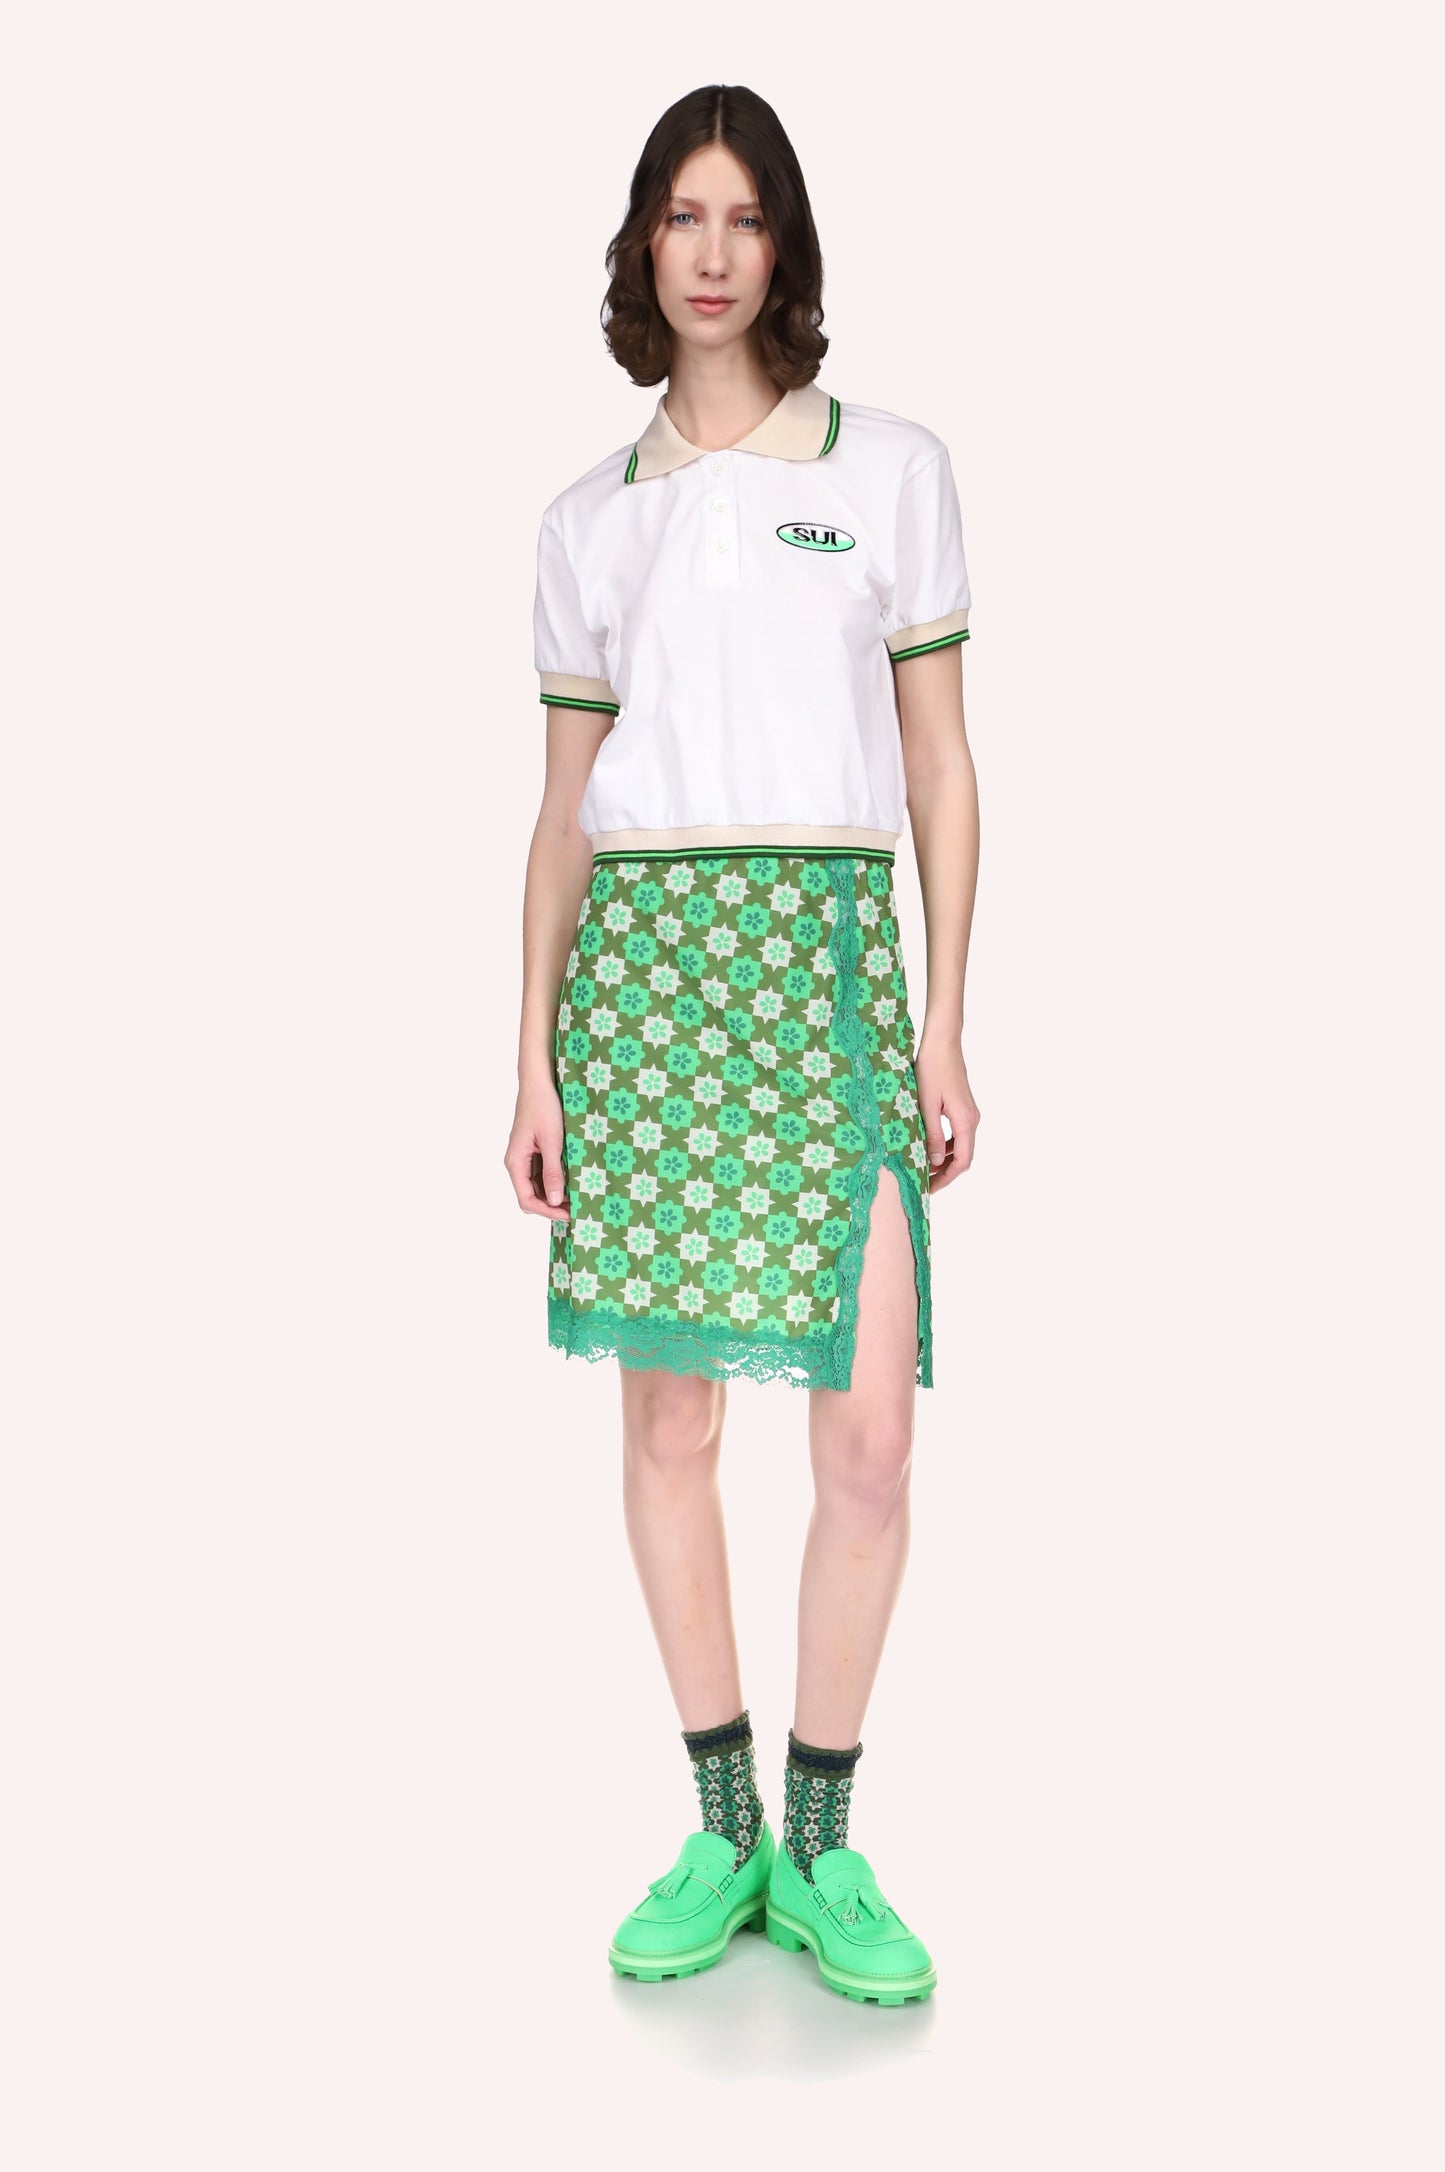 Deco Polo Tee Neon Green is perfectly matching the Utopian Gingham Mesh Skirt Glo Green